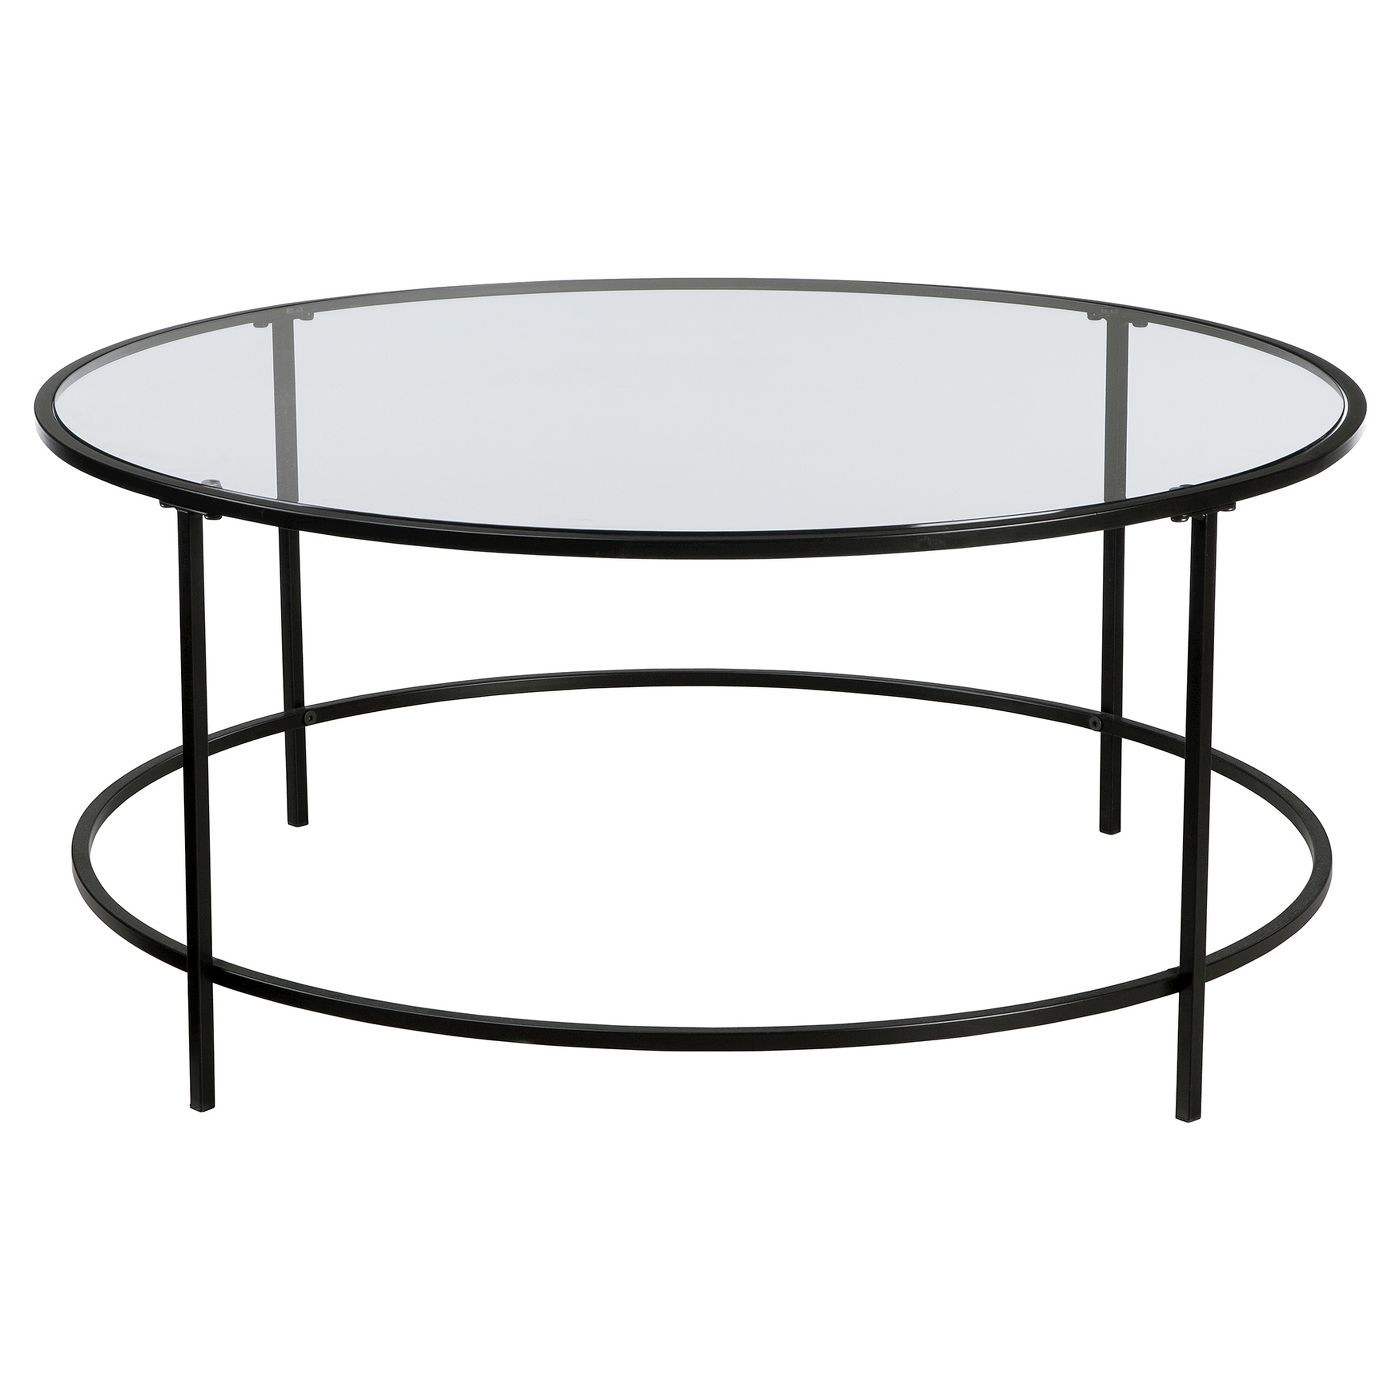 Circular table with glass top and black metal frame